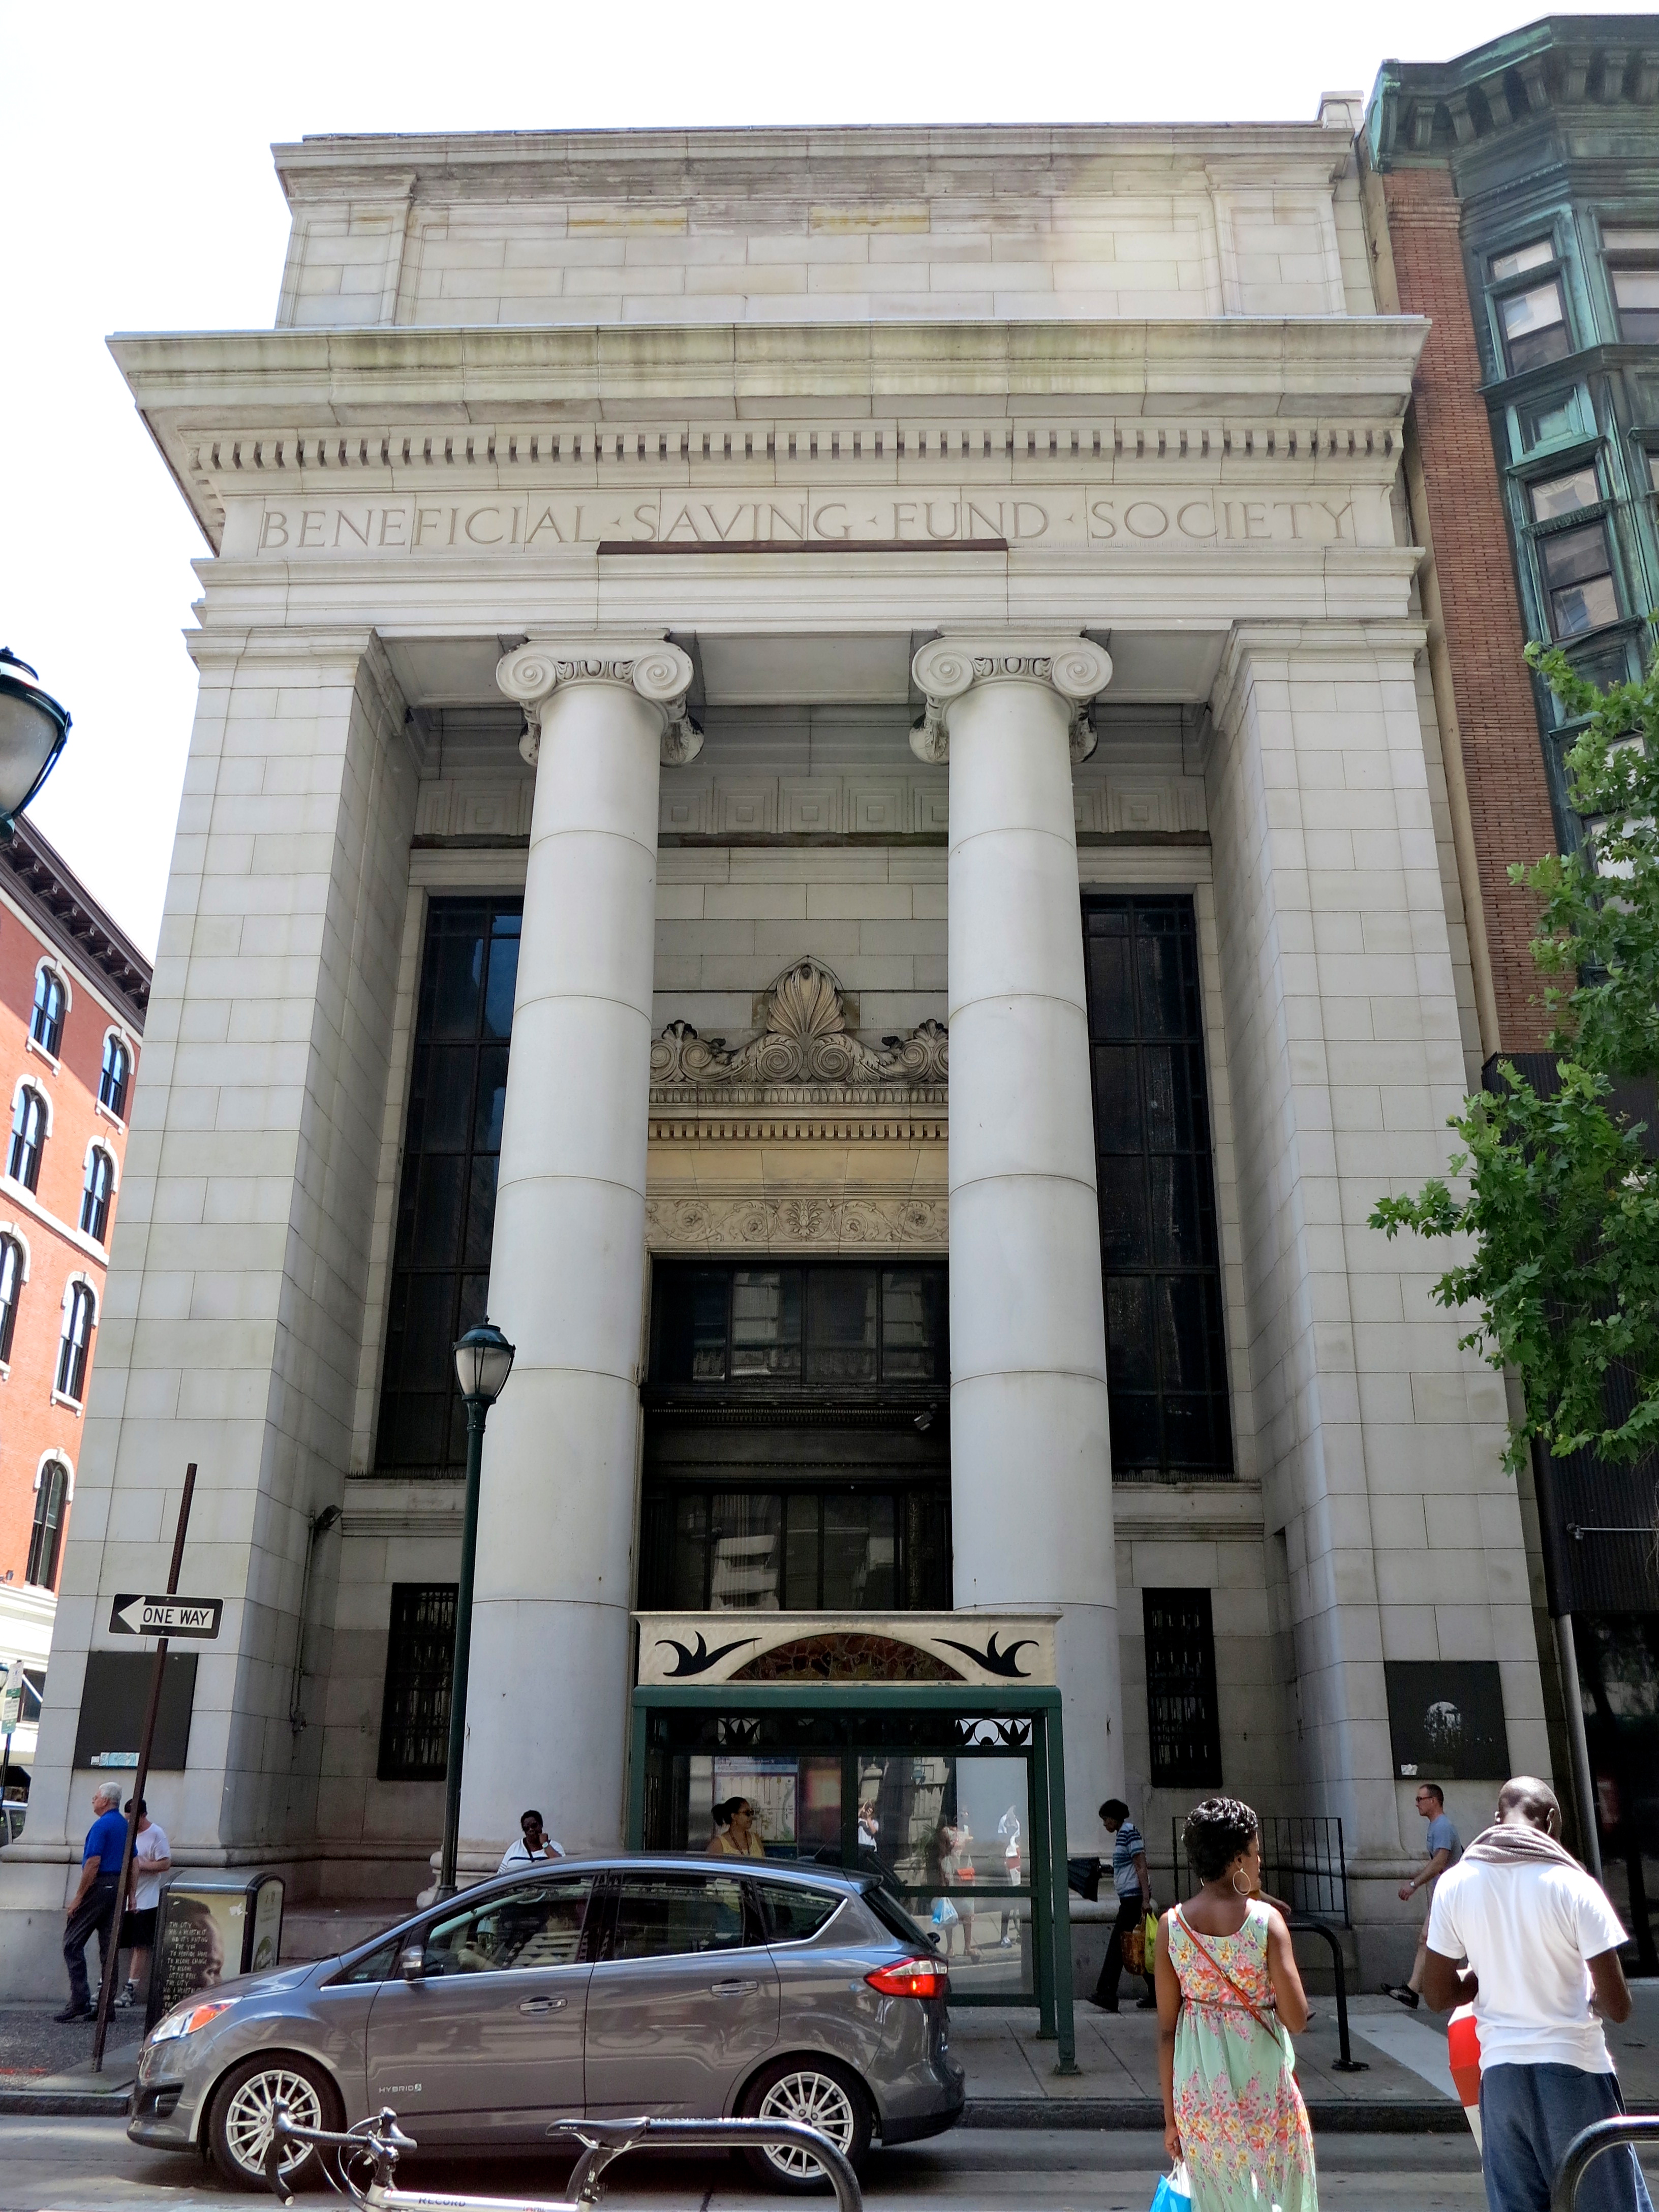 1200-1202 Chestnut was designed by Horace Trumbauer as the headquarters for Beneficial Savings Fund Society, now Beneficial Bank.